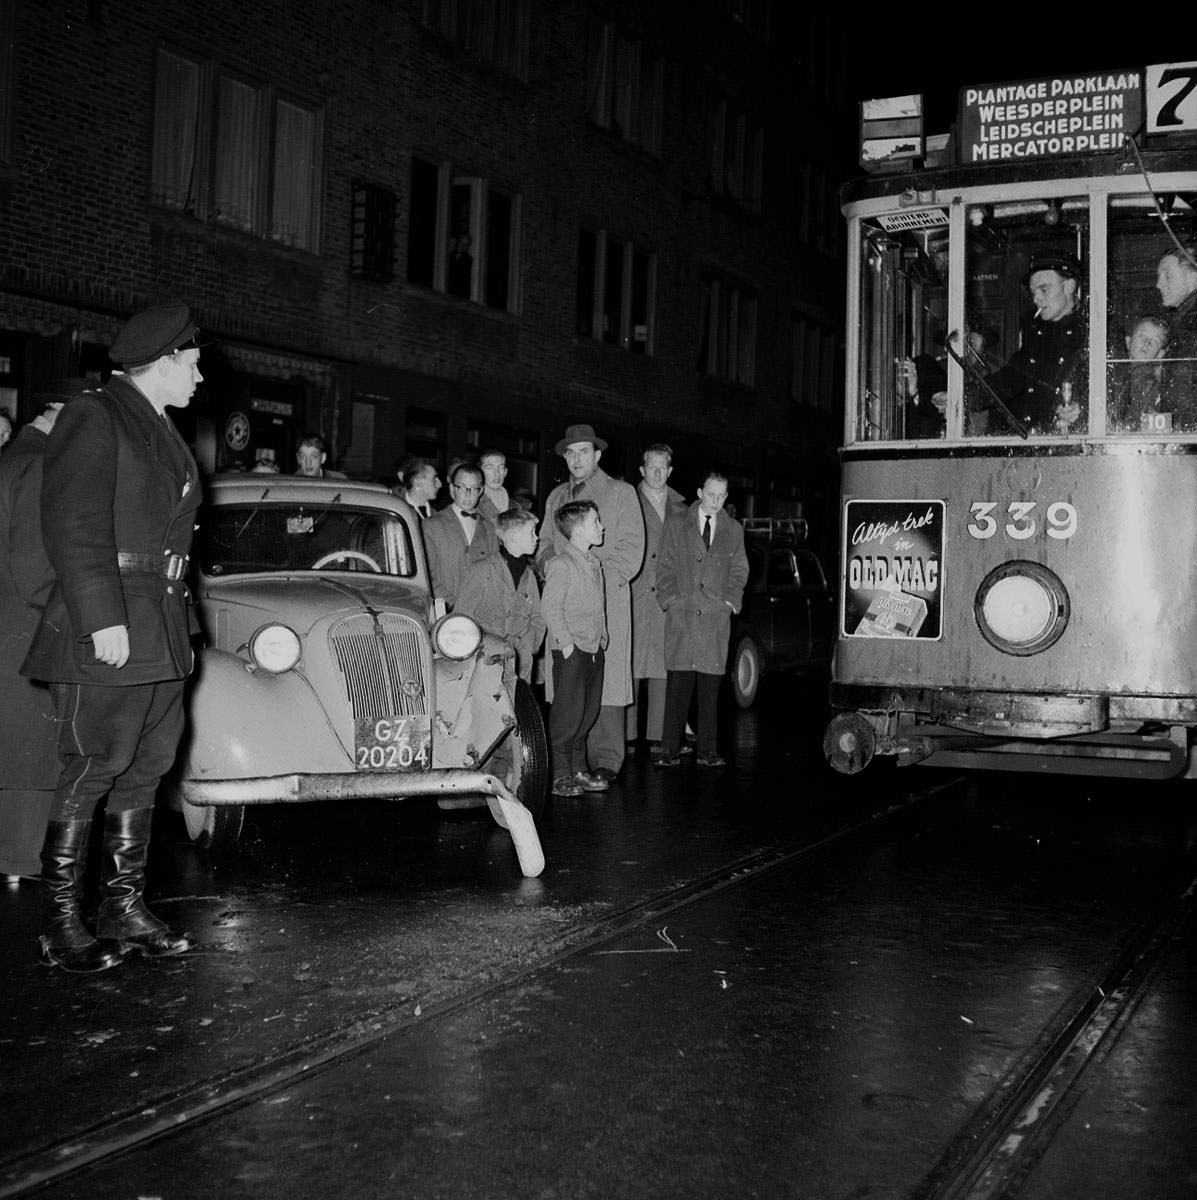 Car collision with tram 7 in the Witte de Withstraat, Amsterdam, December 18, 1955.